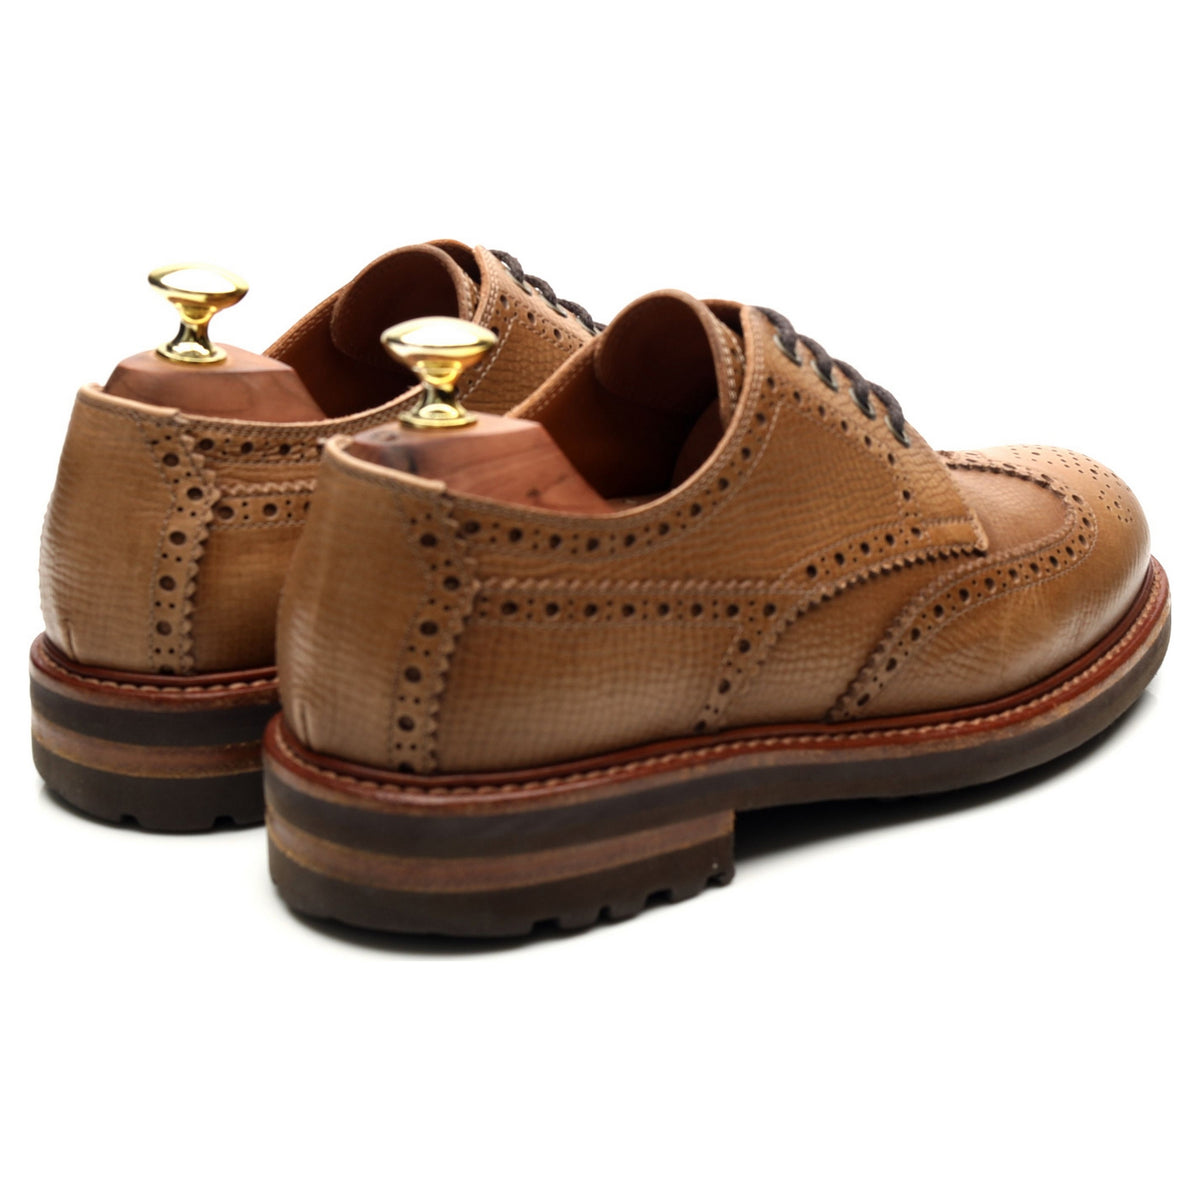 Light Brown Leather Derby Brogues UK 6.5 EU 40.5